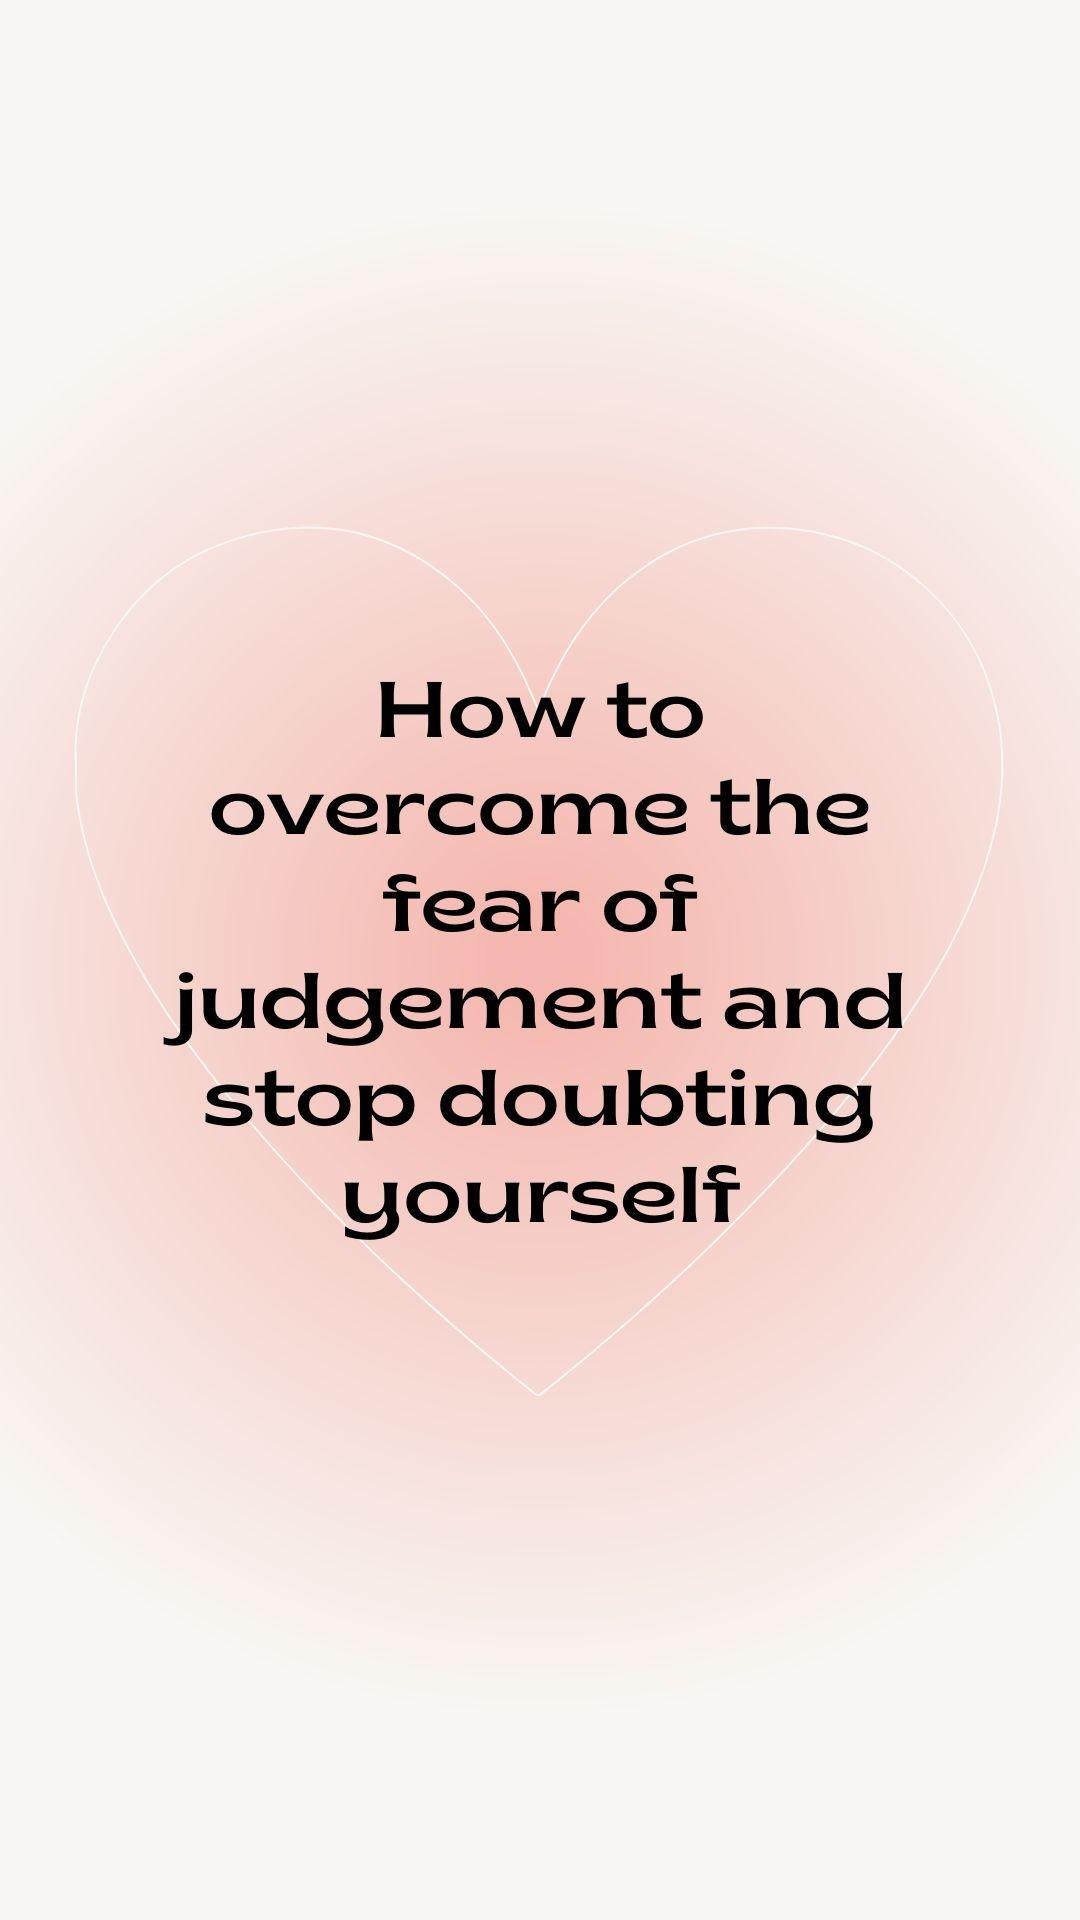 how to overcome the fear of judgement and stop doubting yourself